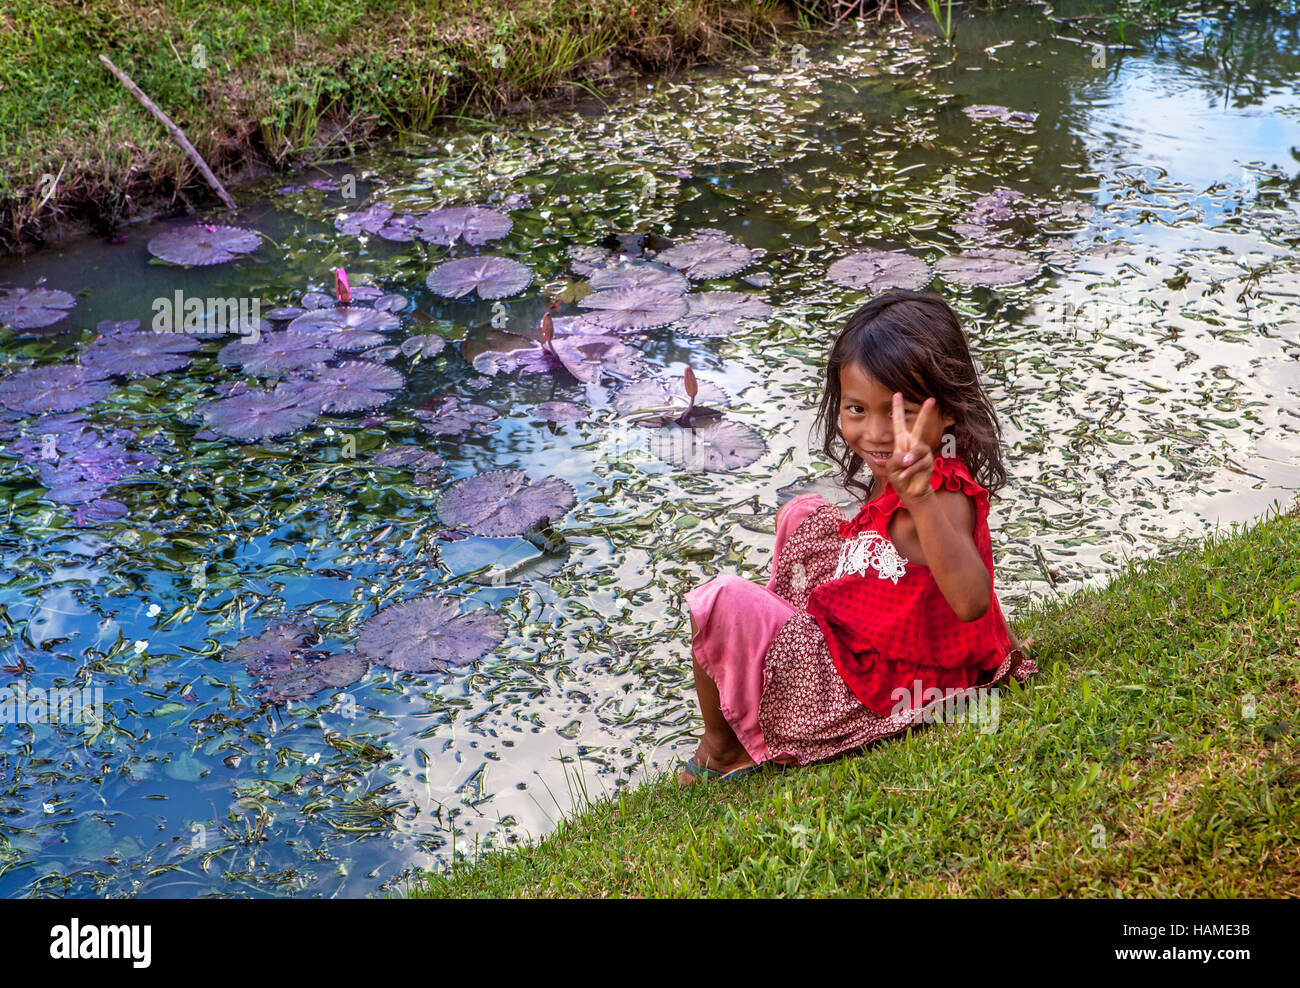 Informal portrait of a young Khmer girl sitting on the bank of a stream filled with Lily pads in Banteay Srei, Cambodia. Stock Photo